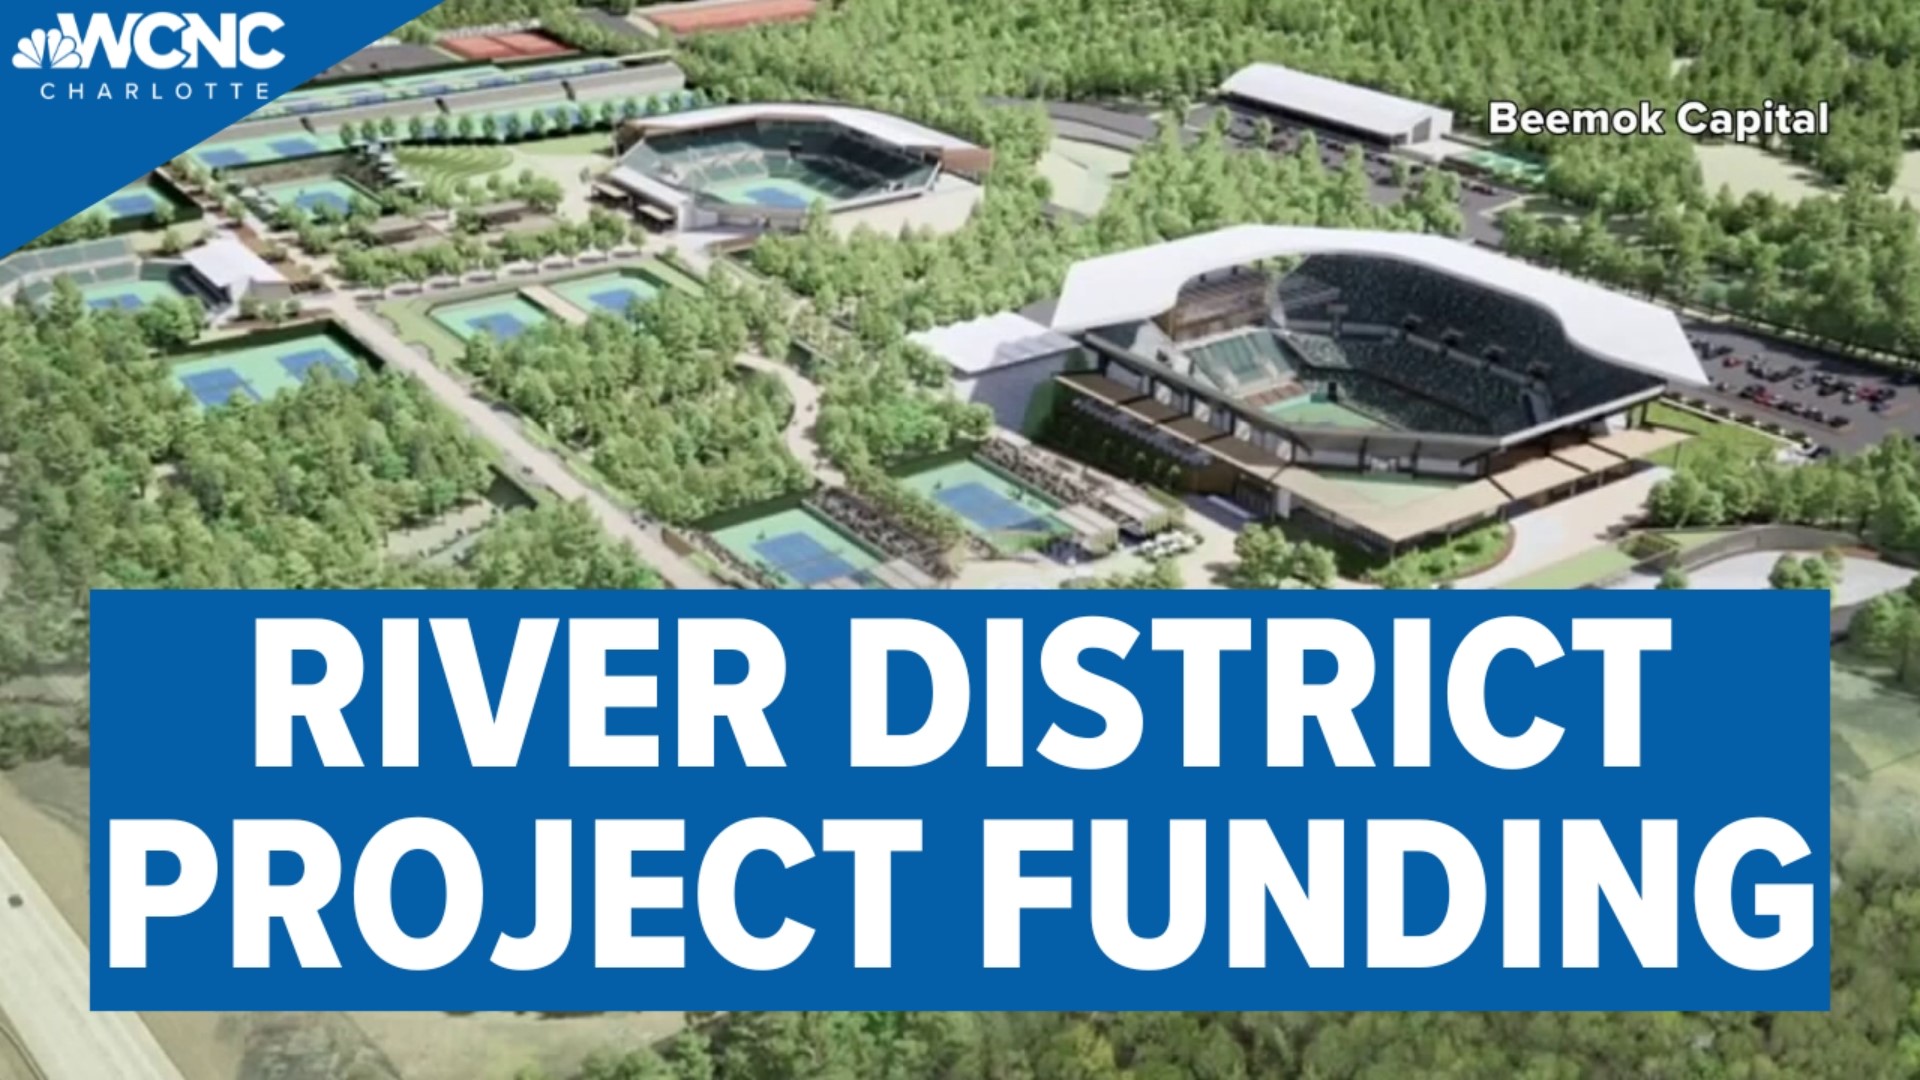 The tennis facility would be a big part of the 1,400-acre River District, which is aimed at revitalizing Charlotte’s west side.